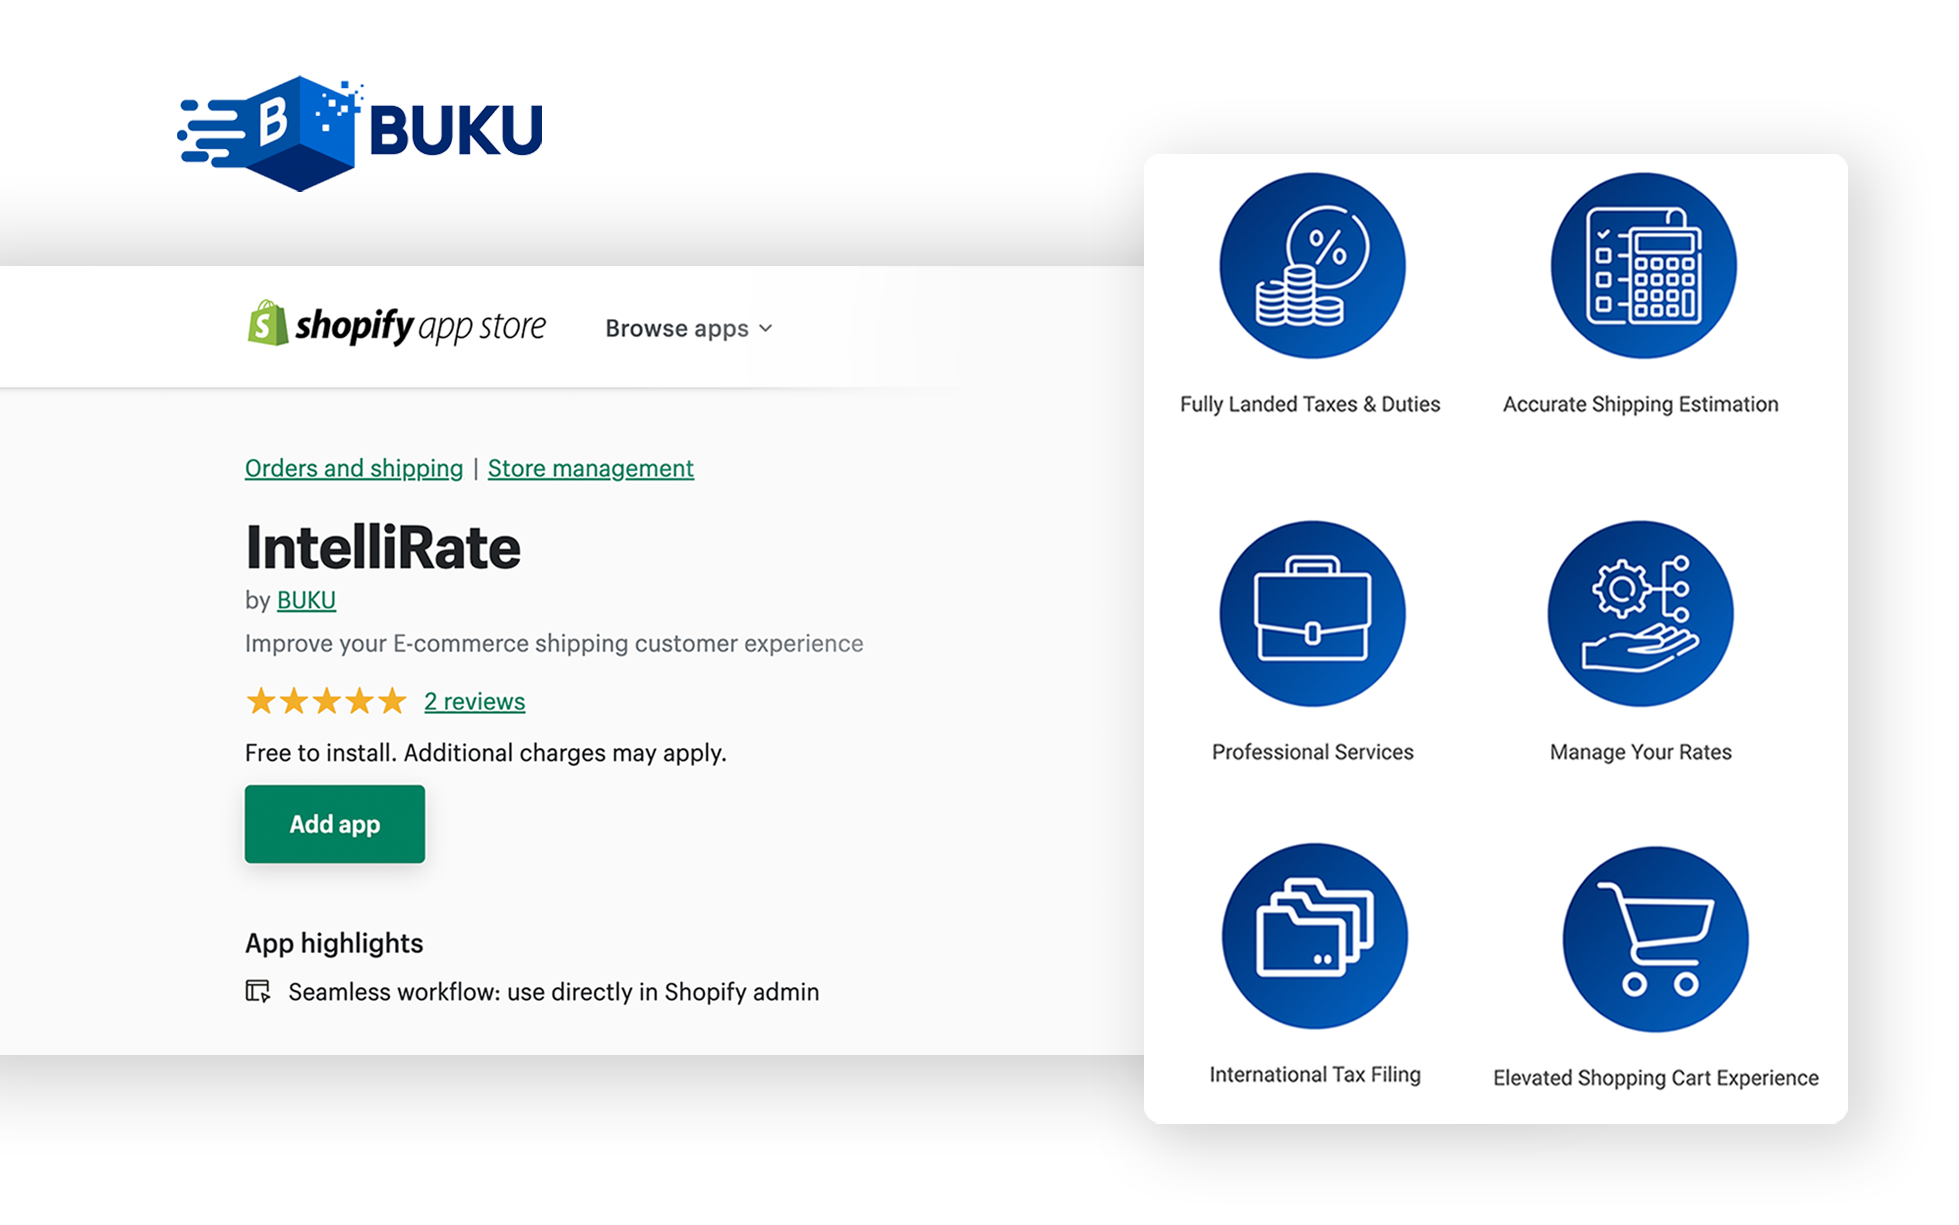 BUKU Intellirate is the best shipping app on Shopify